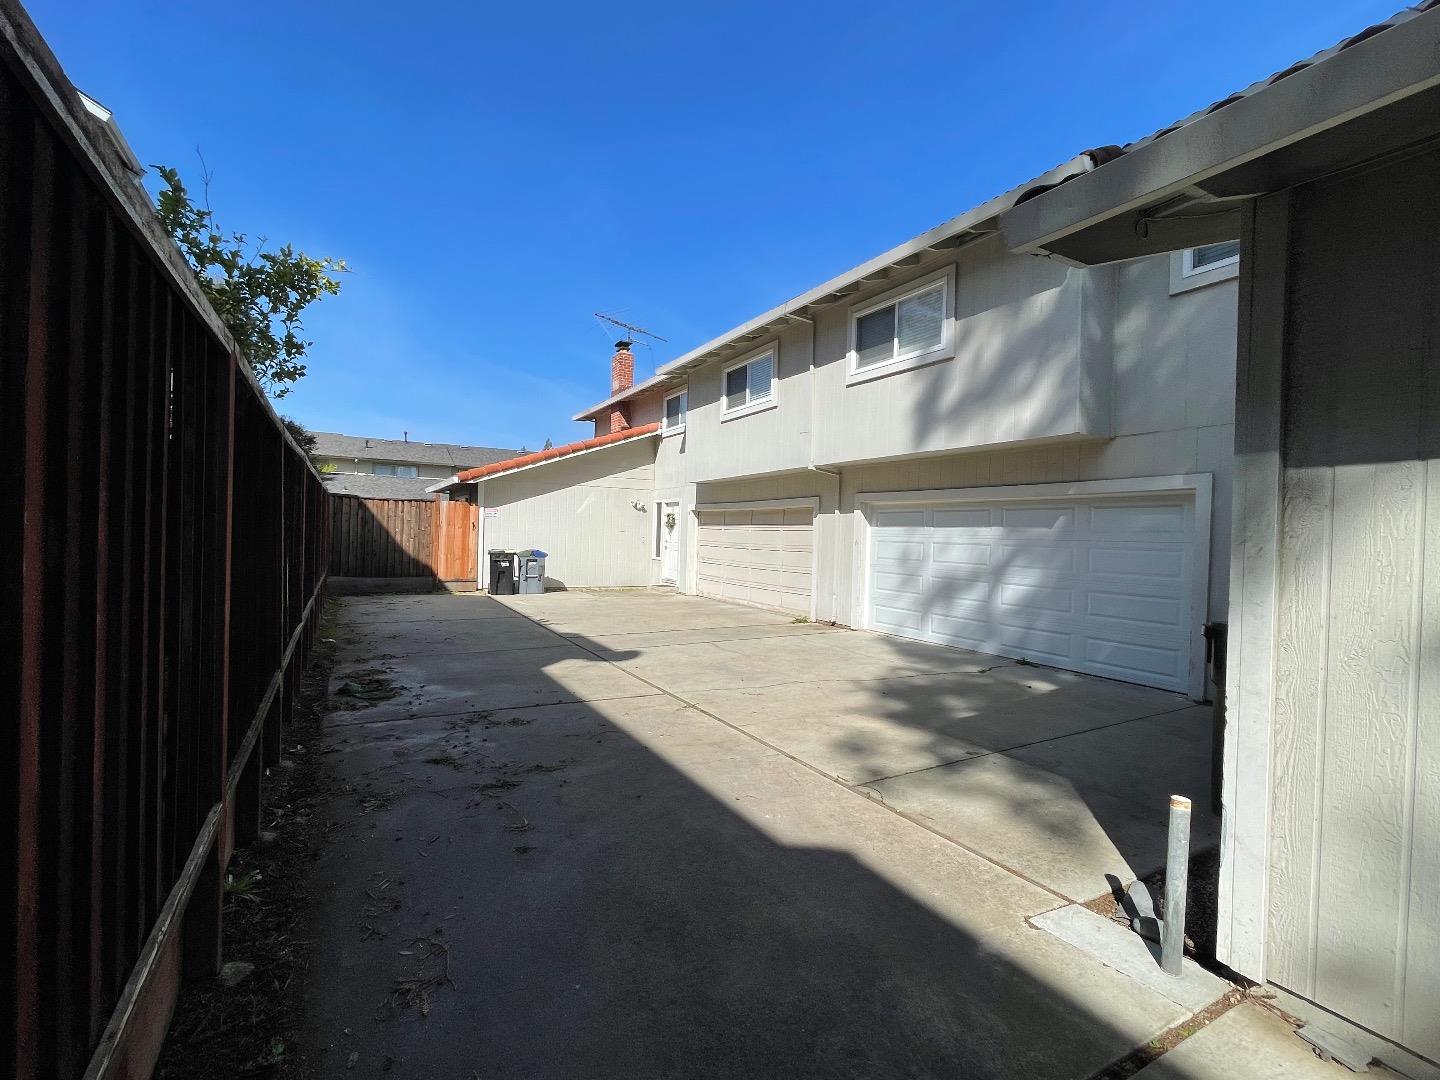 Photo of 1235 Hollenbeck Ave in Sunnyvale, CA